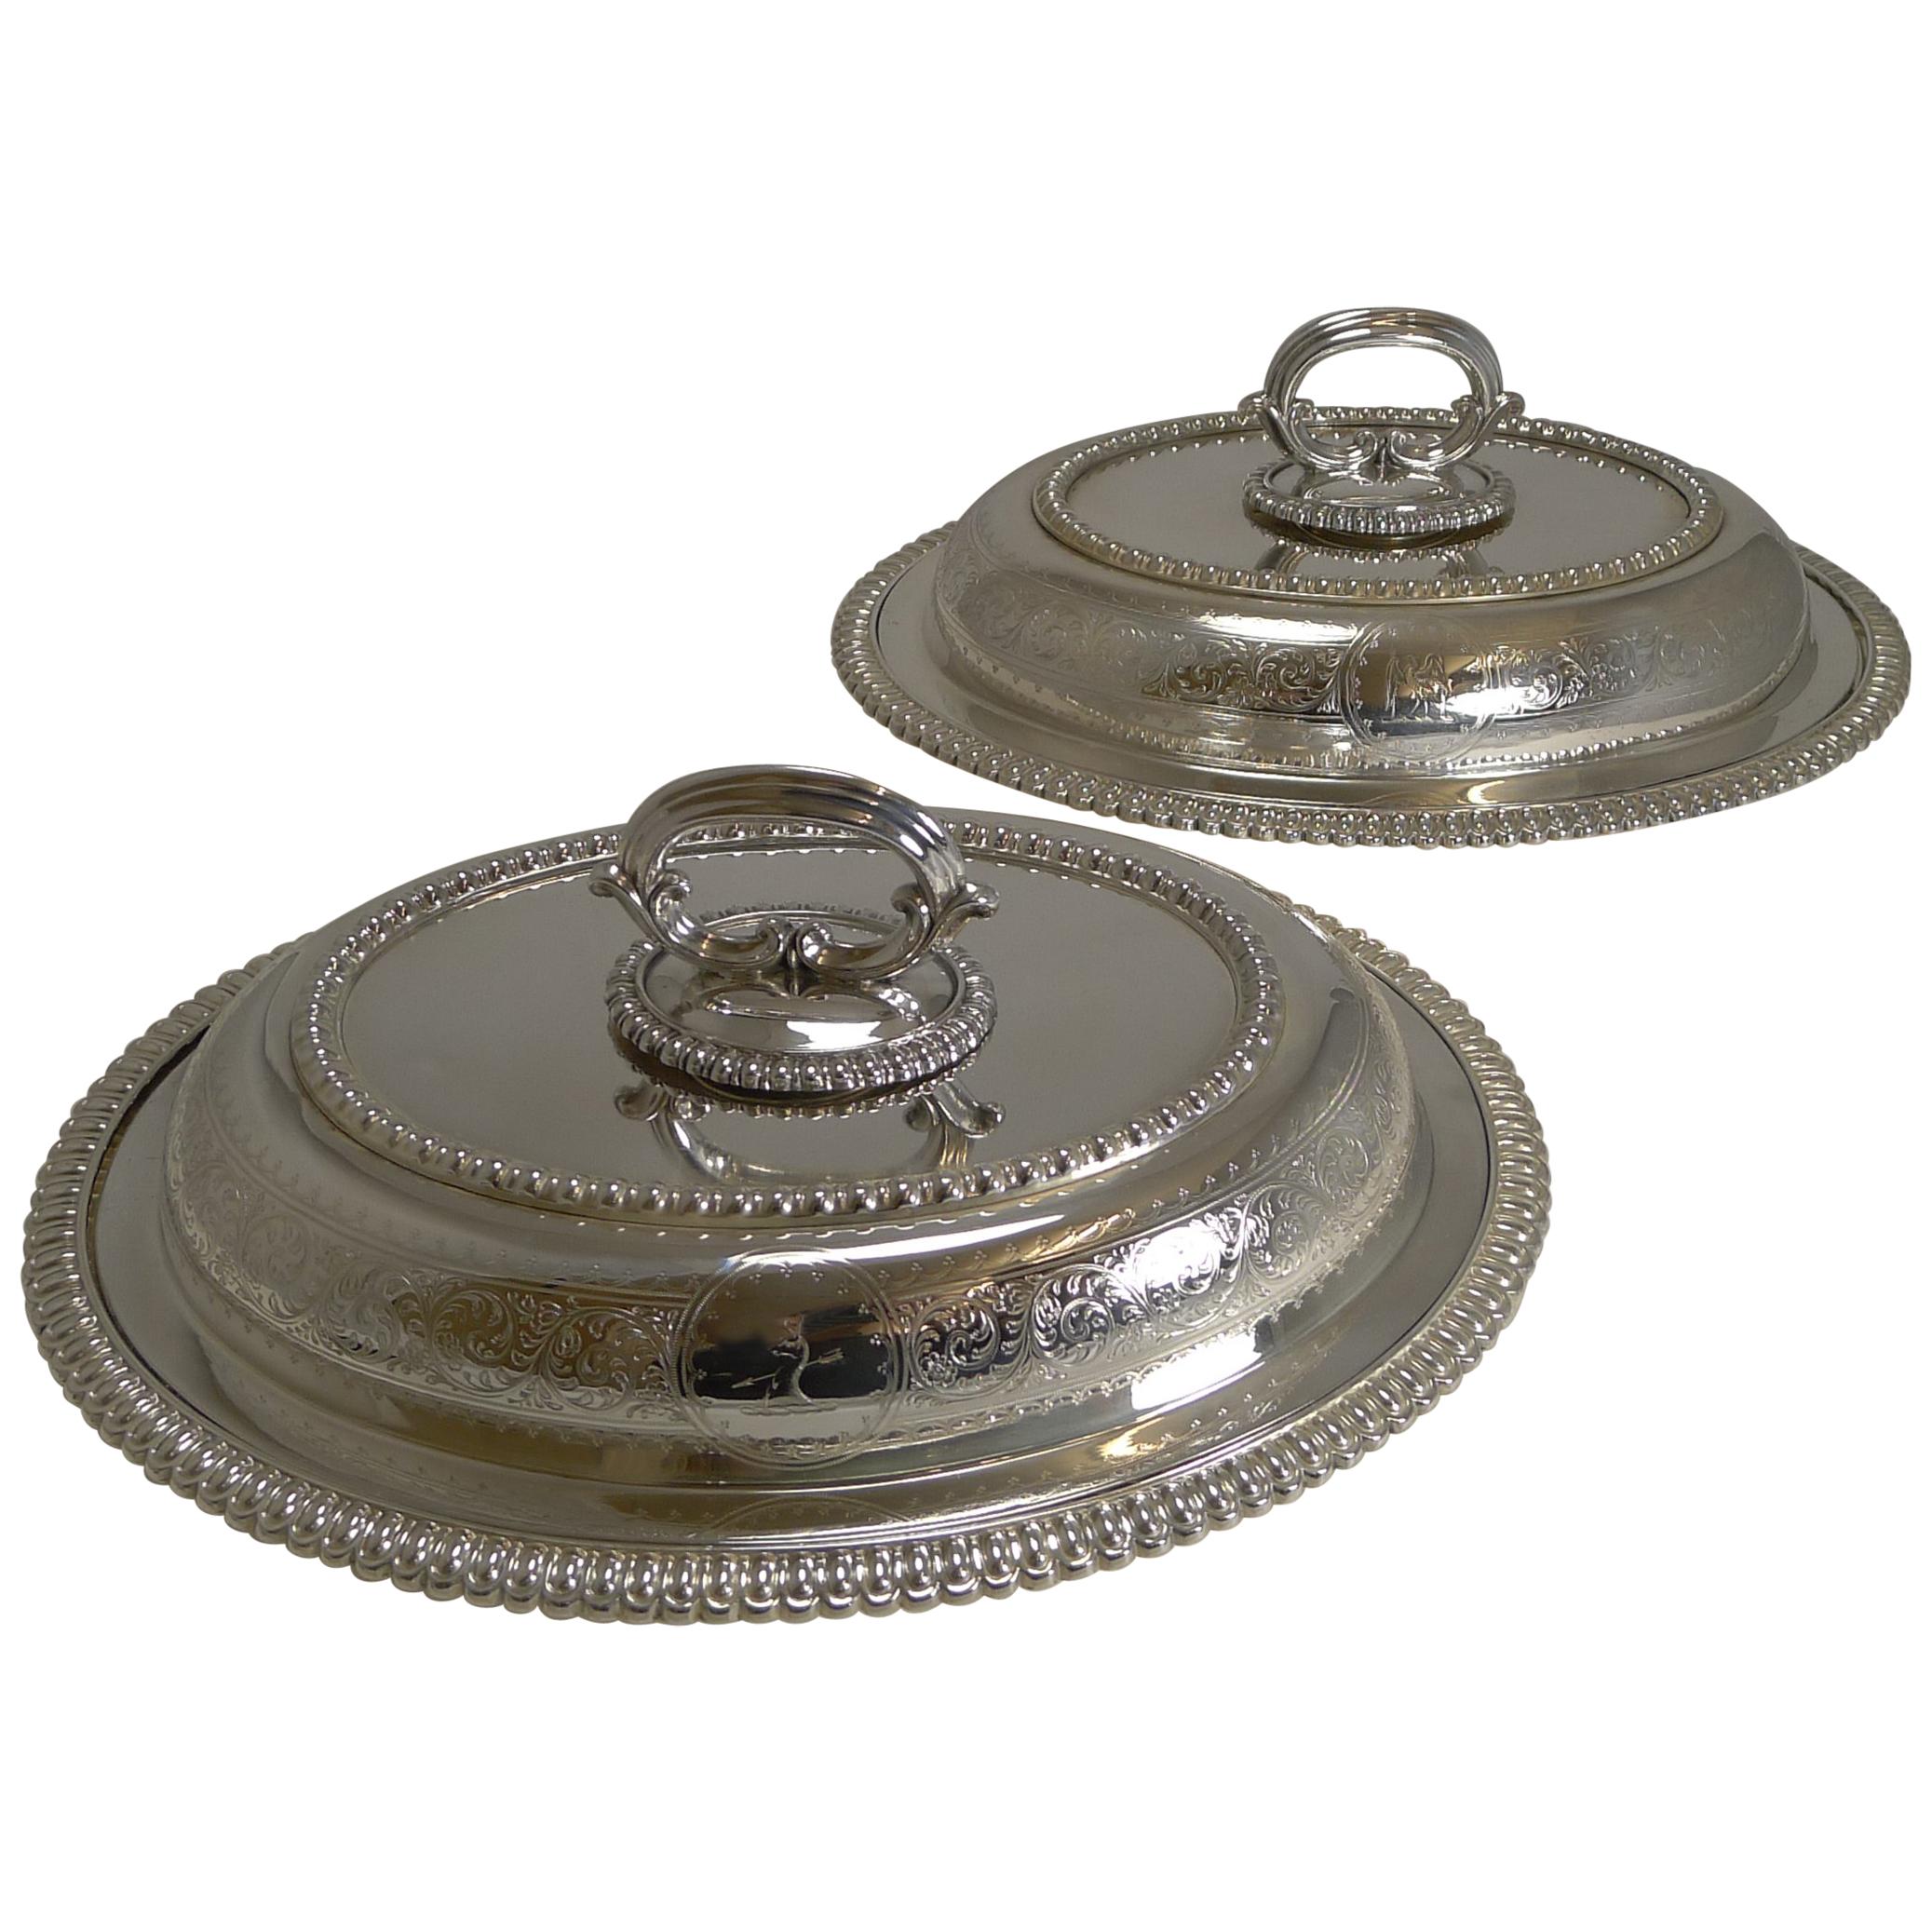 Pair of Elkington Silver Plated Entree/Serving Dishes, 1884